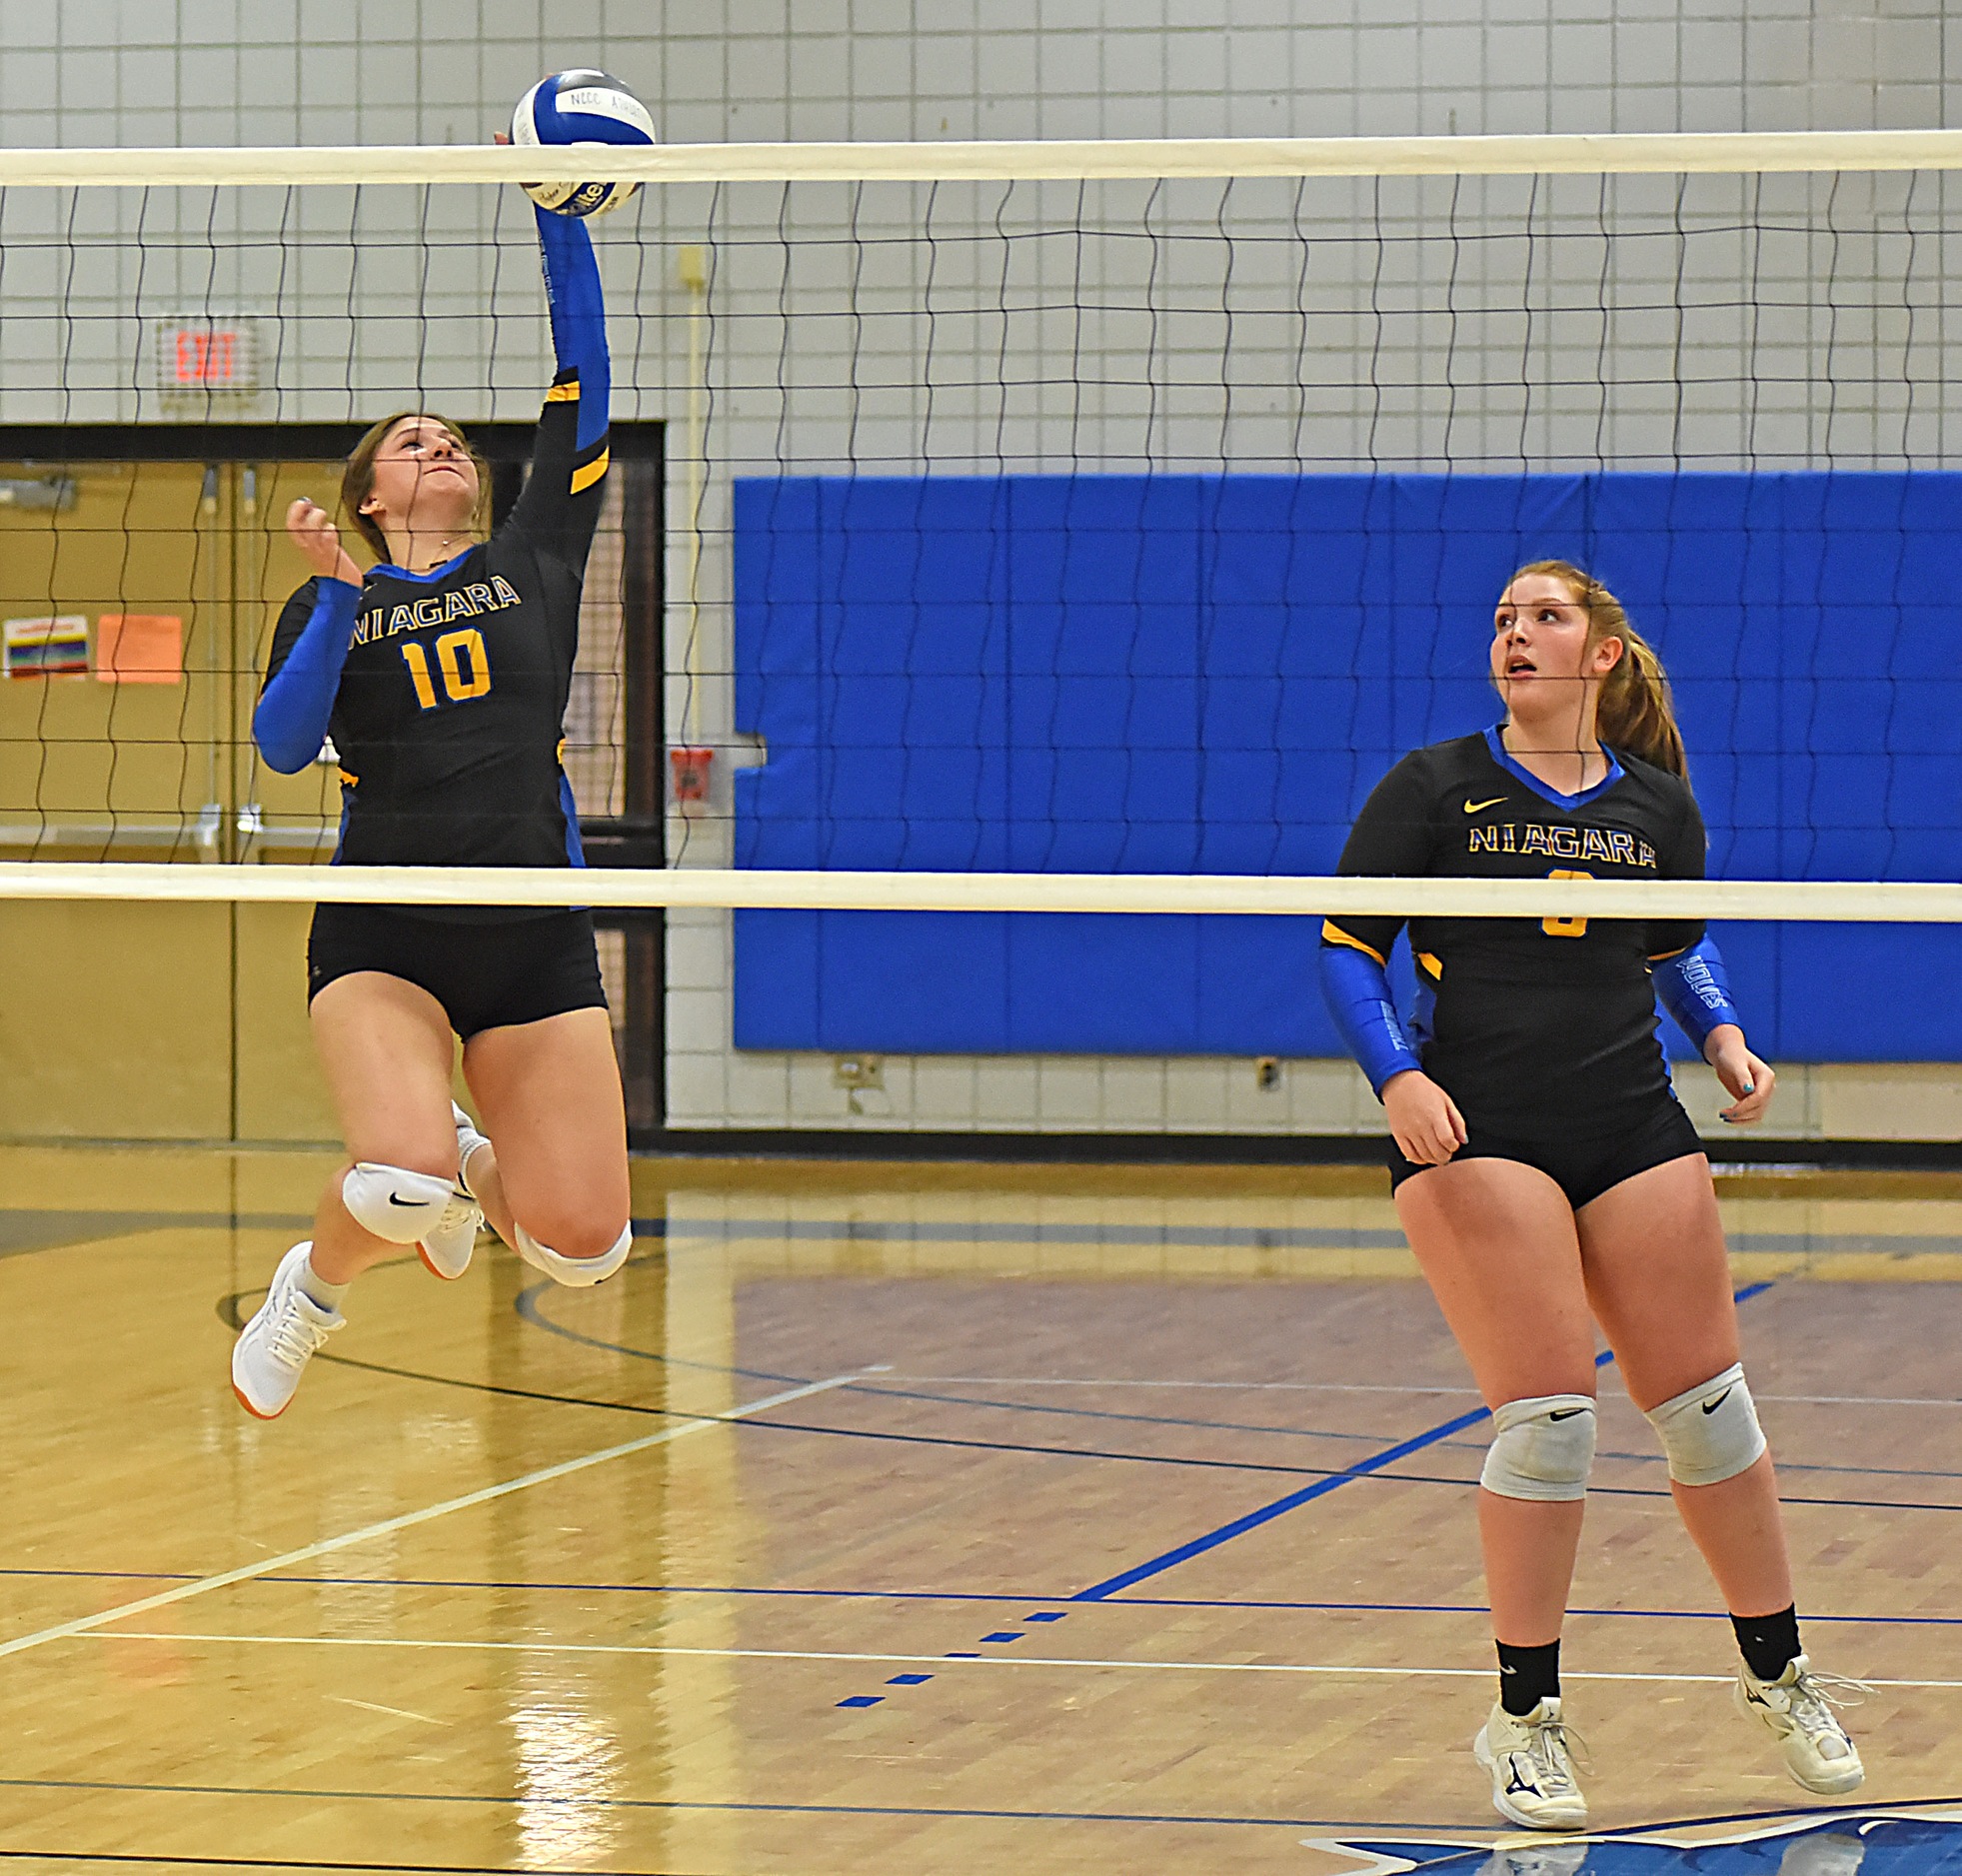 NCCC swept by rival Jayhawks